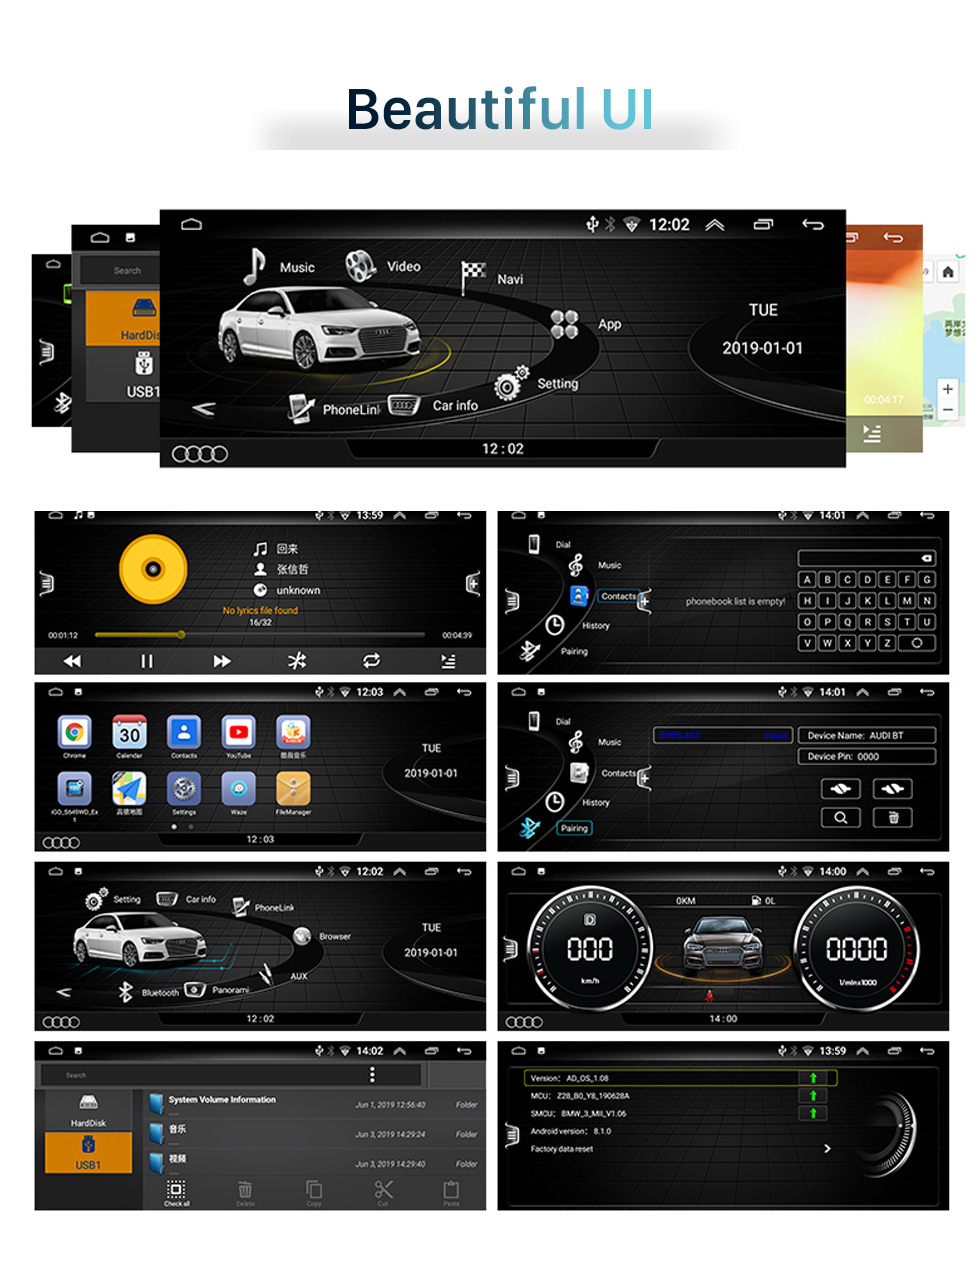 Seicane HD Touchscreen 8.8 inch for Audi Q5 2009-2017 Radio Android 10.0 GPS Navigation System with Bluetooth support Carplay TPMS